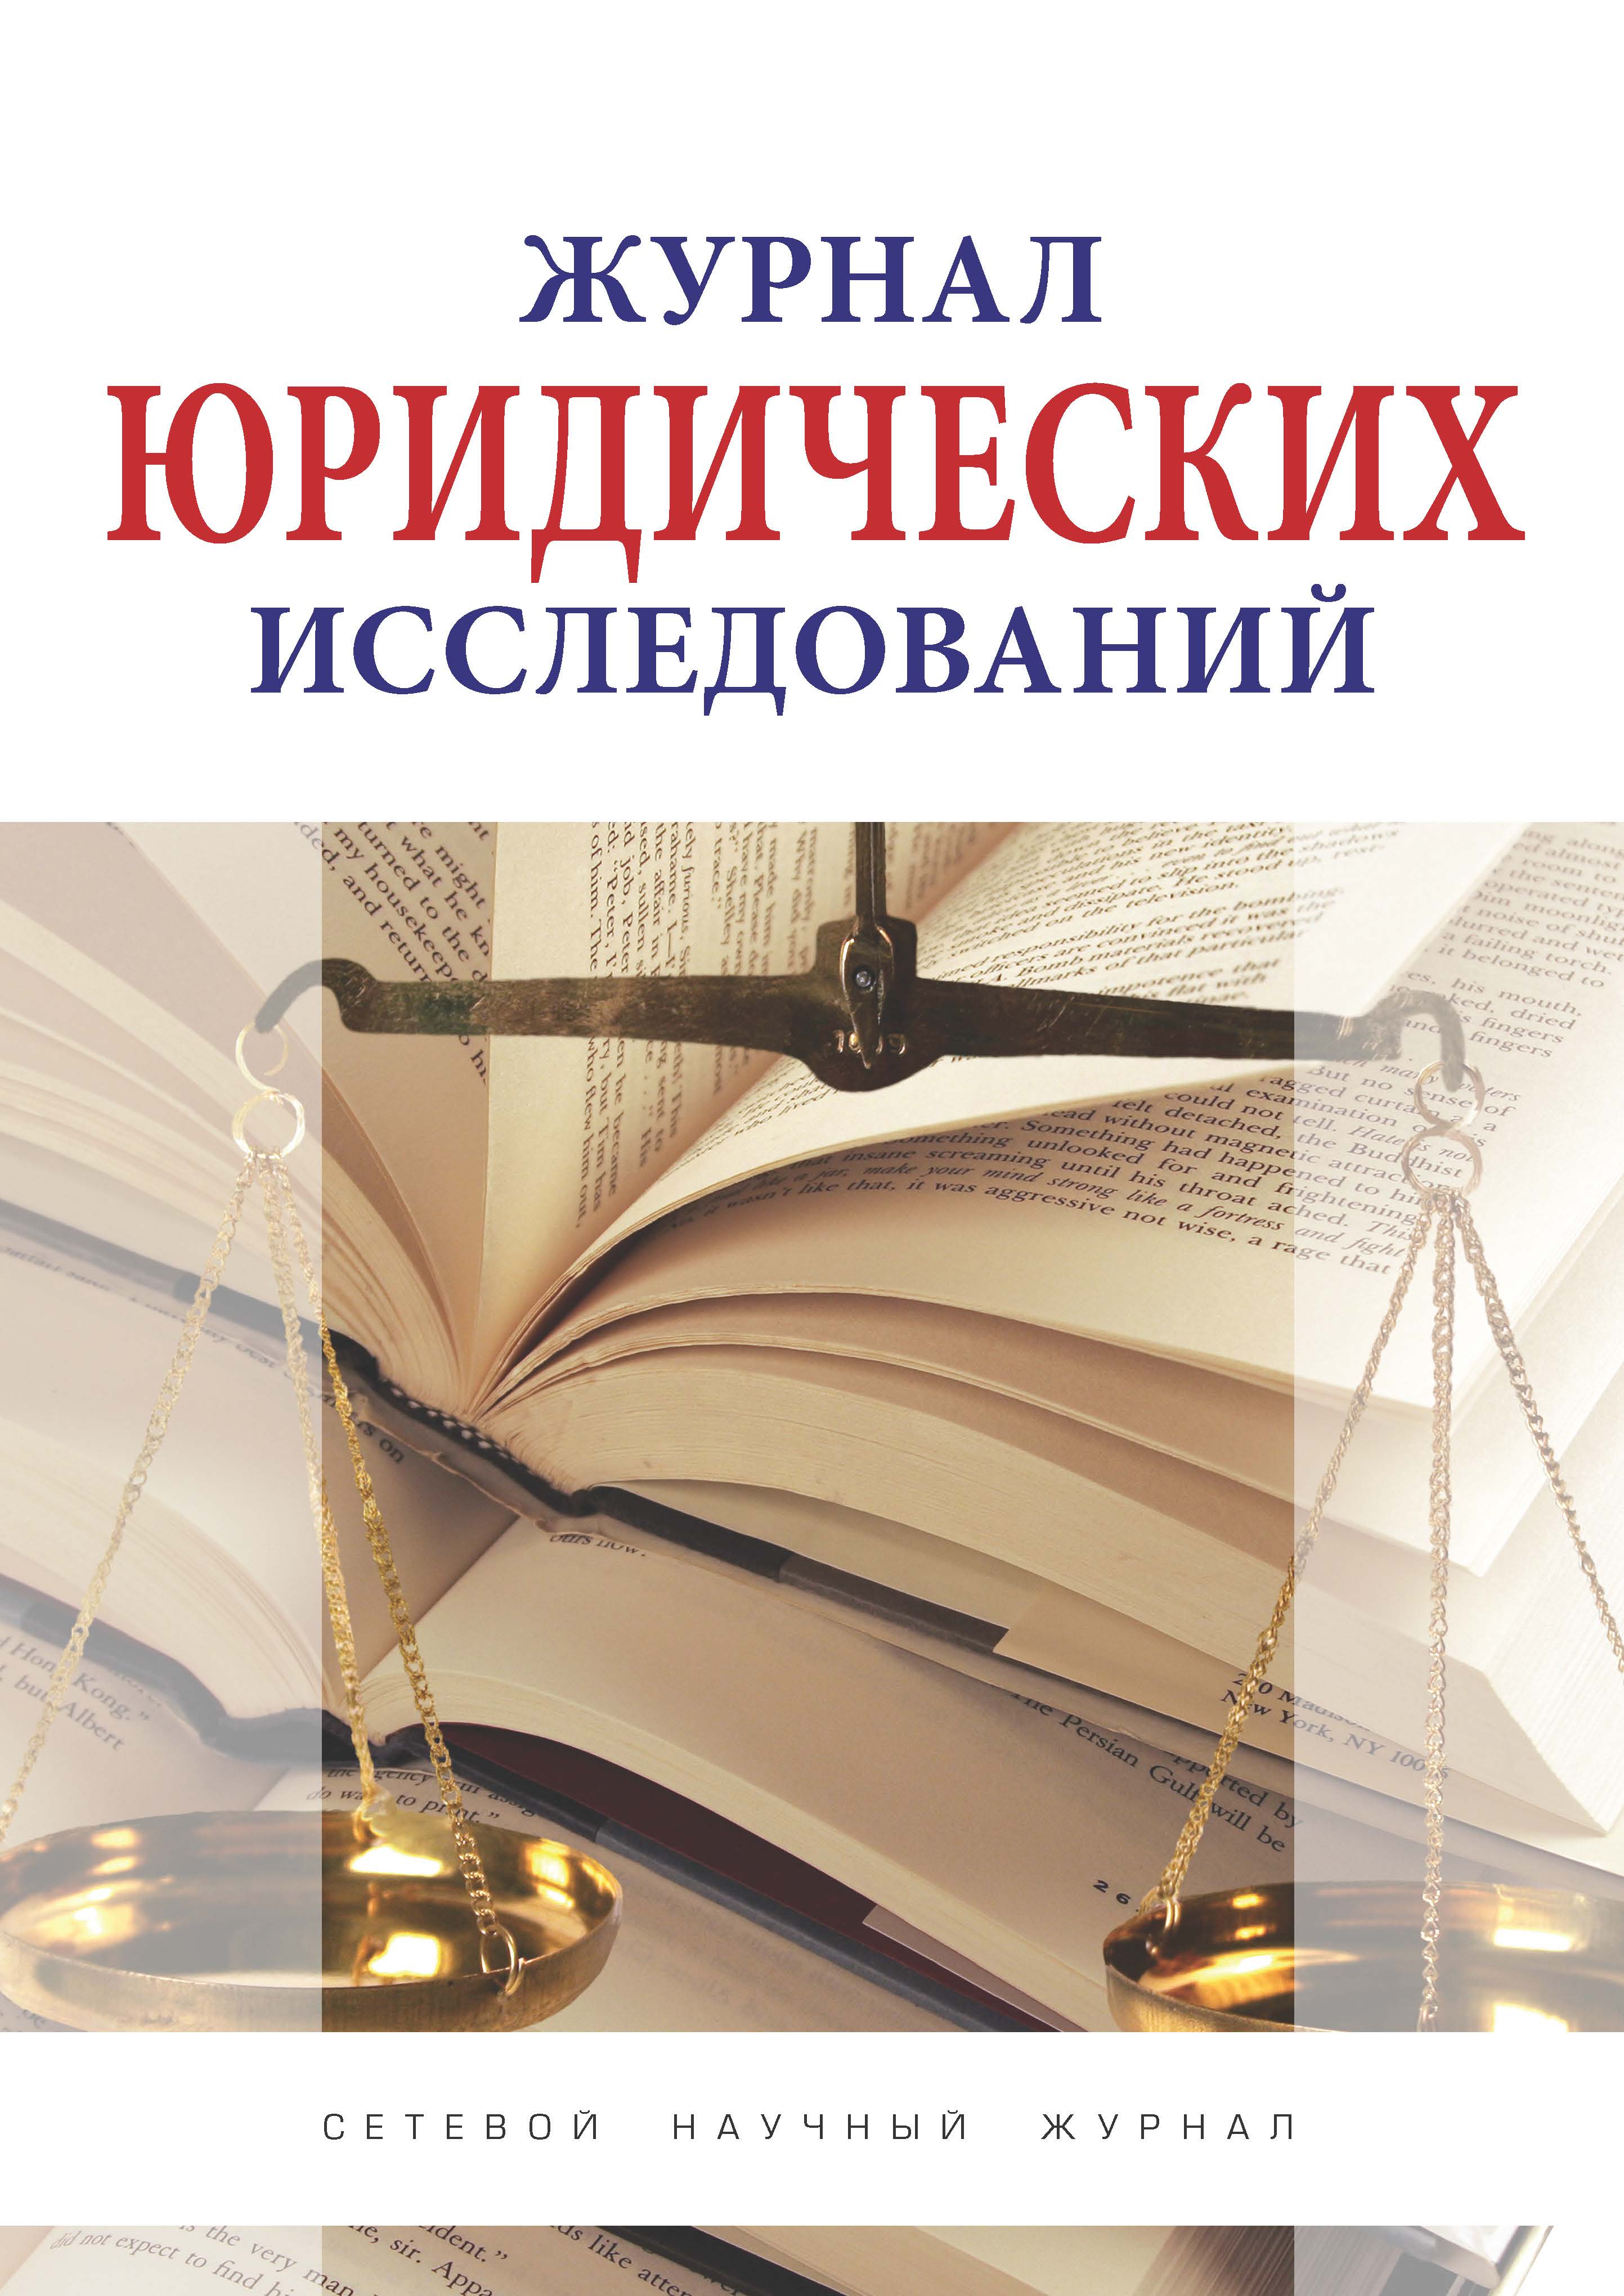                         Algorithms for Evaluation of Evidence by a Judge as a Heritage of the Charter of Criminal Proceedings of 1864
            